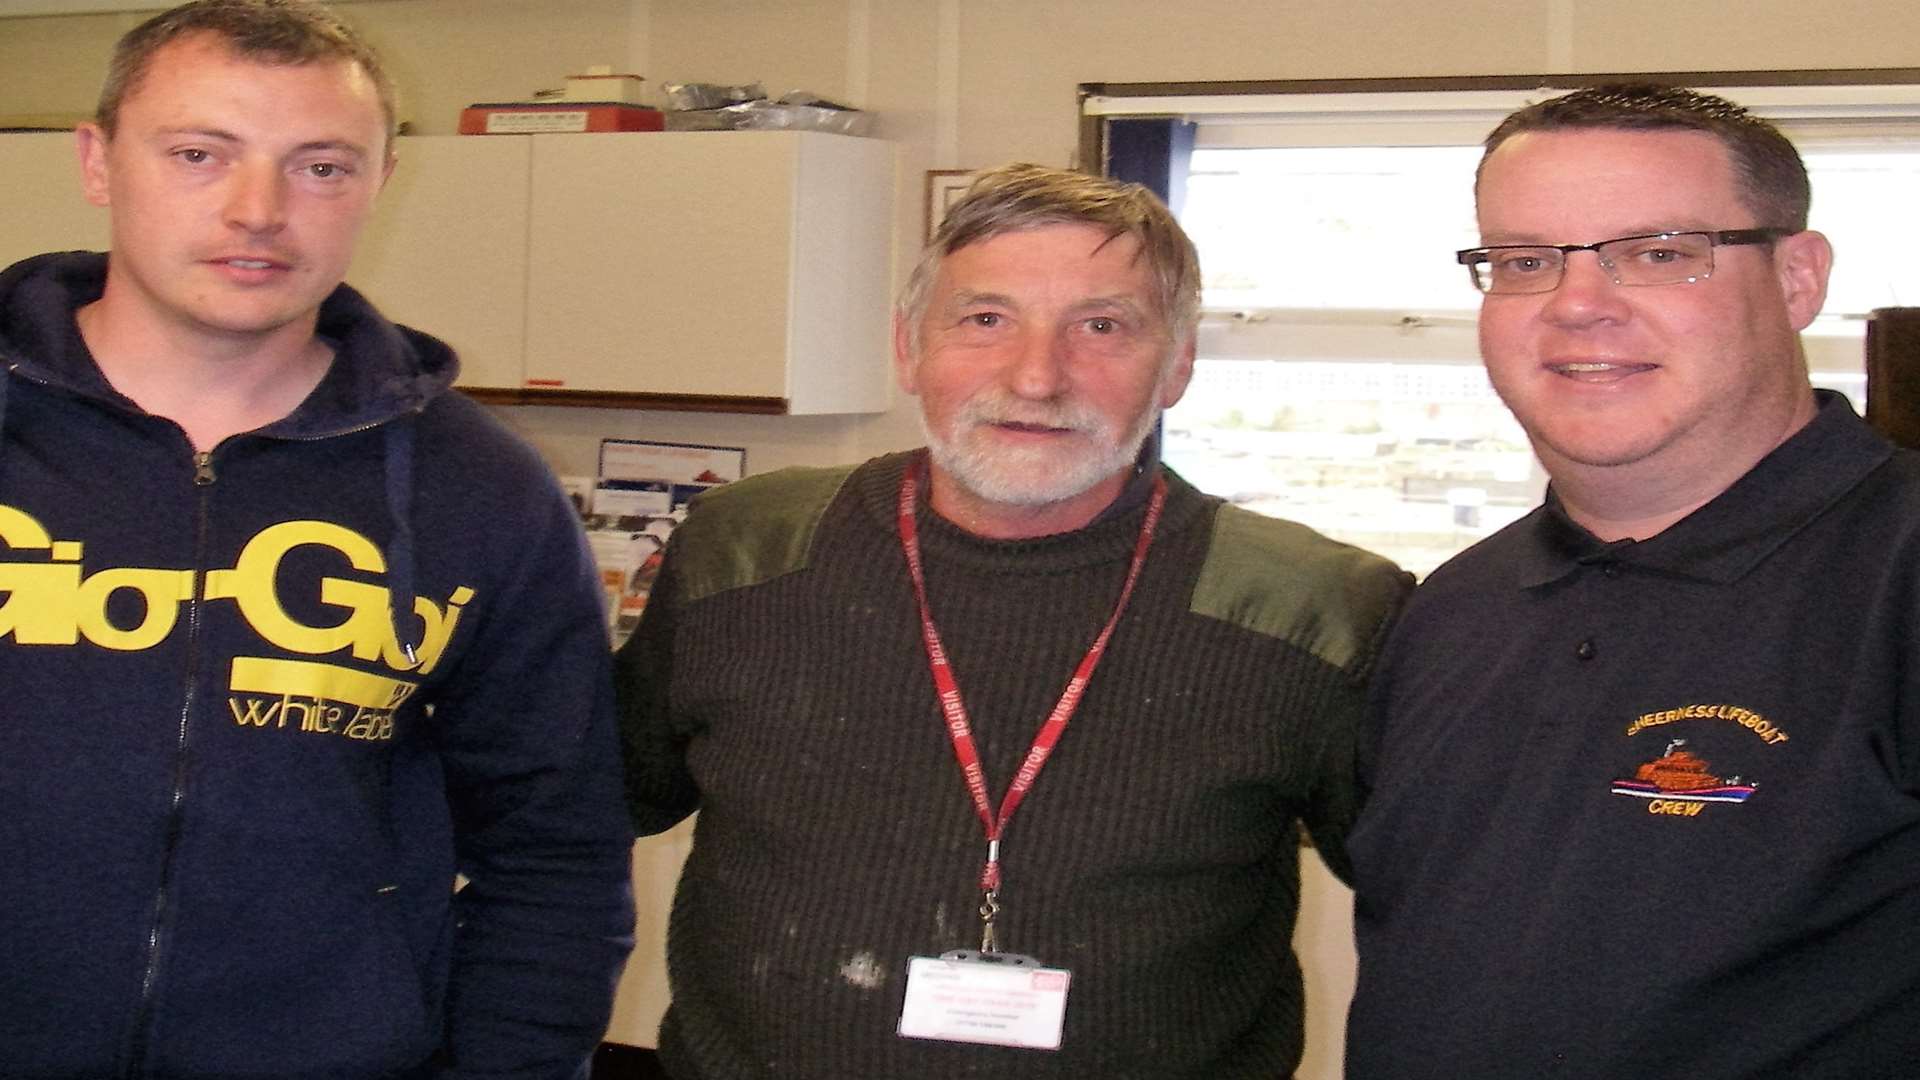 Ken Milburn, centre, with his rescuers, Sheerness Lifeboat volunteers Kris White and Mark Tucker